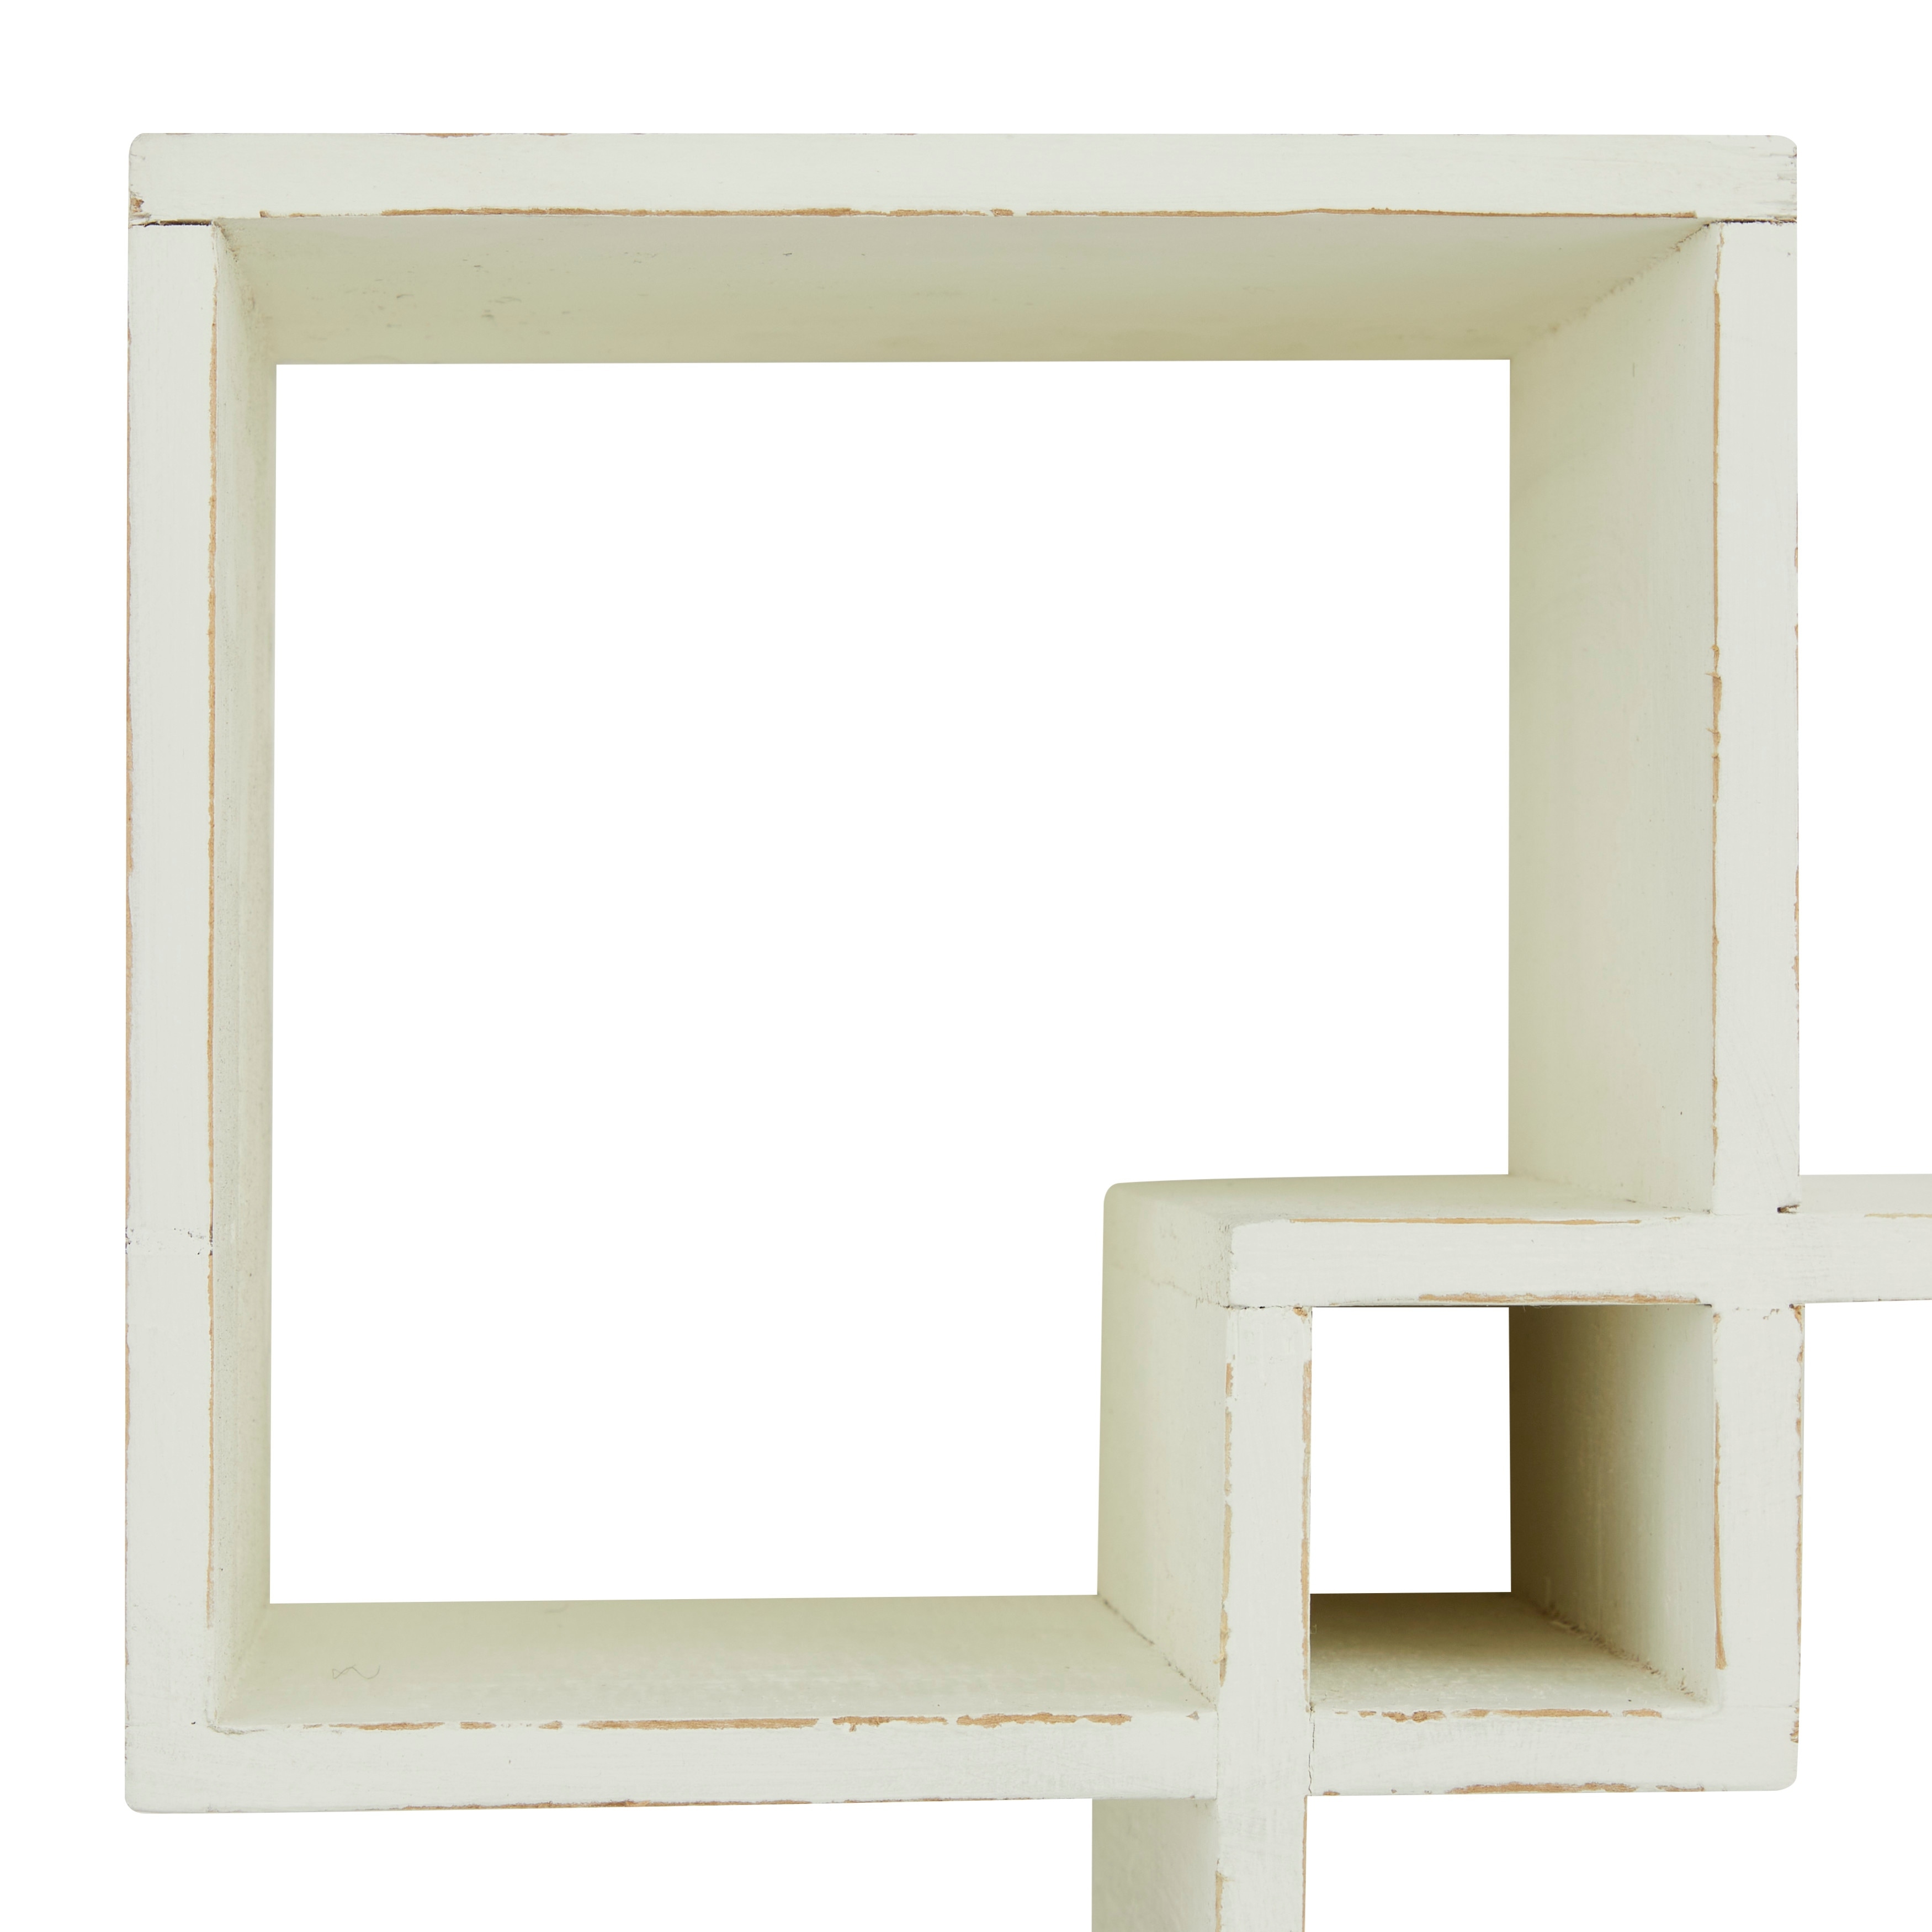 12 X 2 Inch White Wall Shelf Free Shipping Uses 3M Command -  Sweden